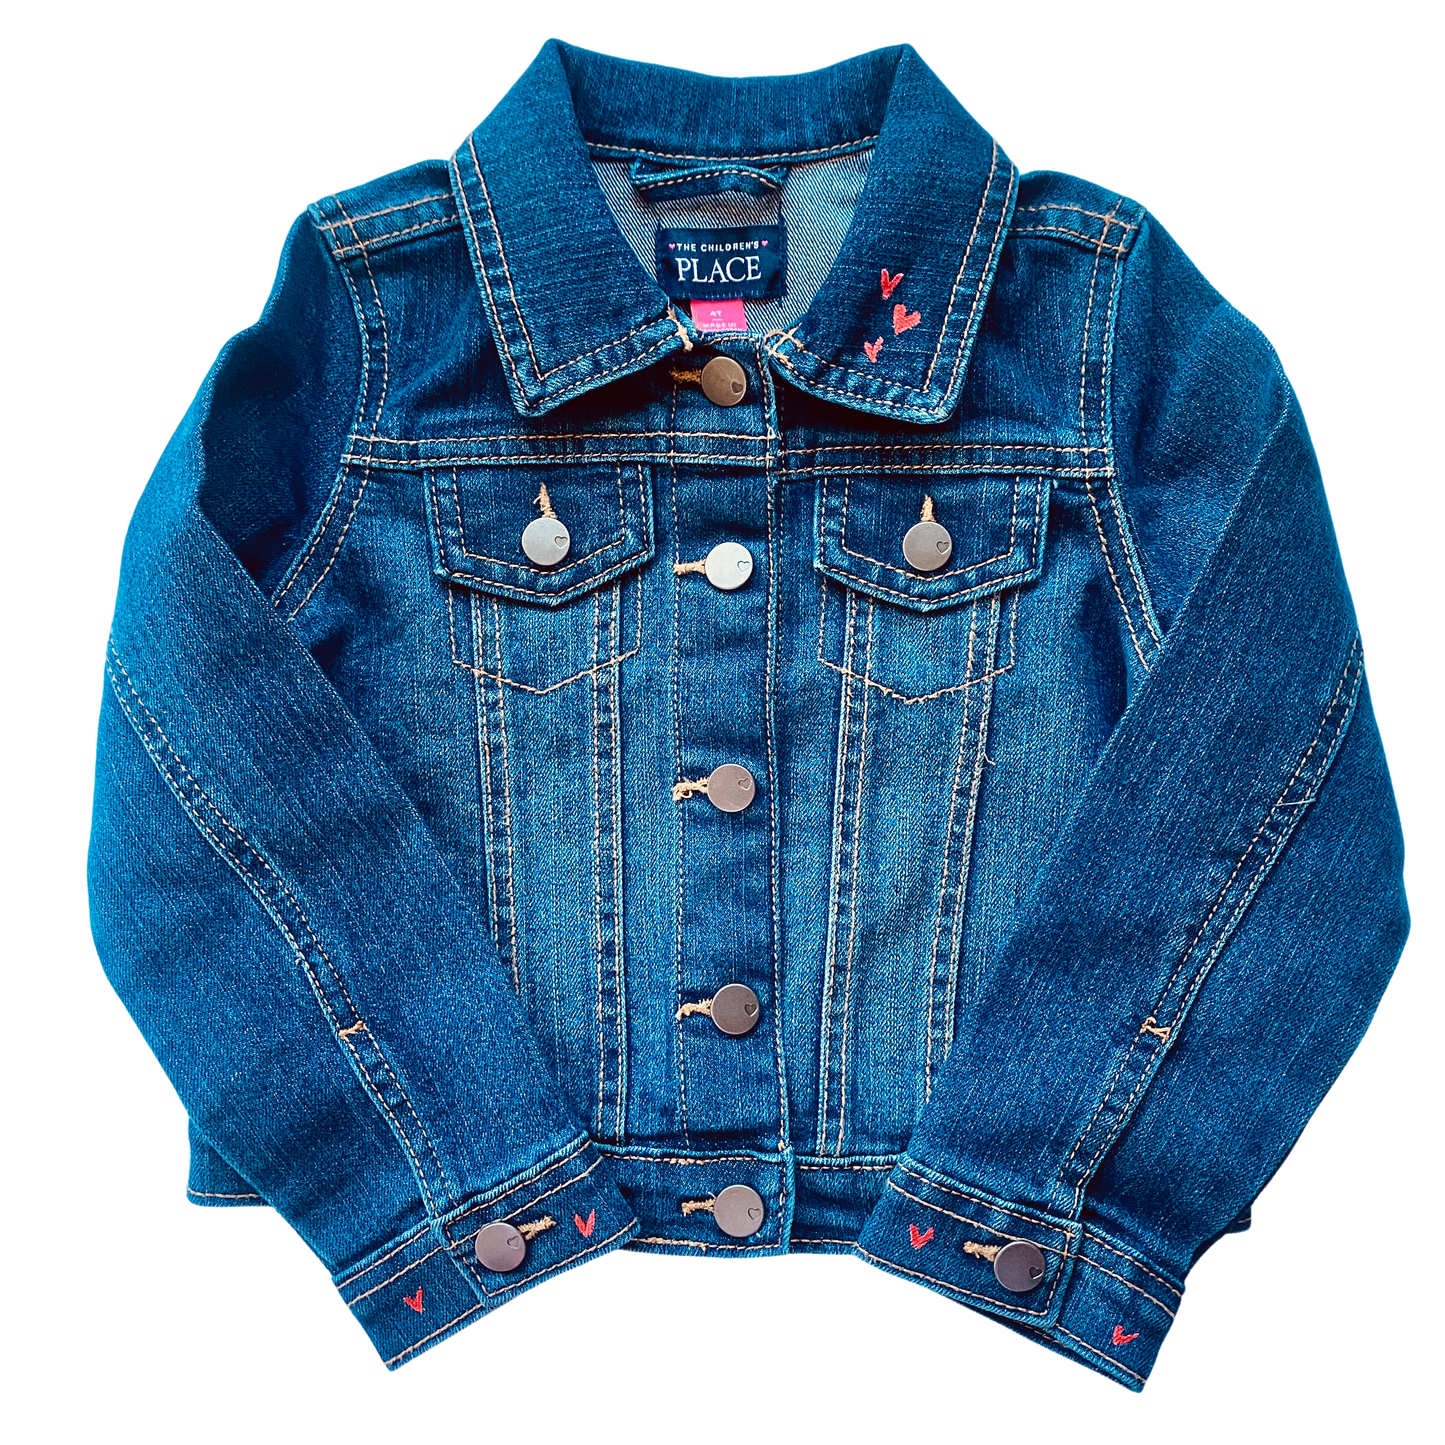 Hand Painted Toddler Jean Jacket - 5T